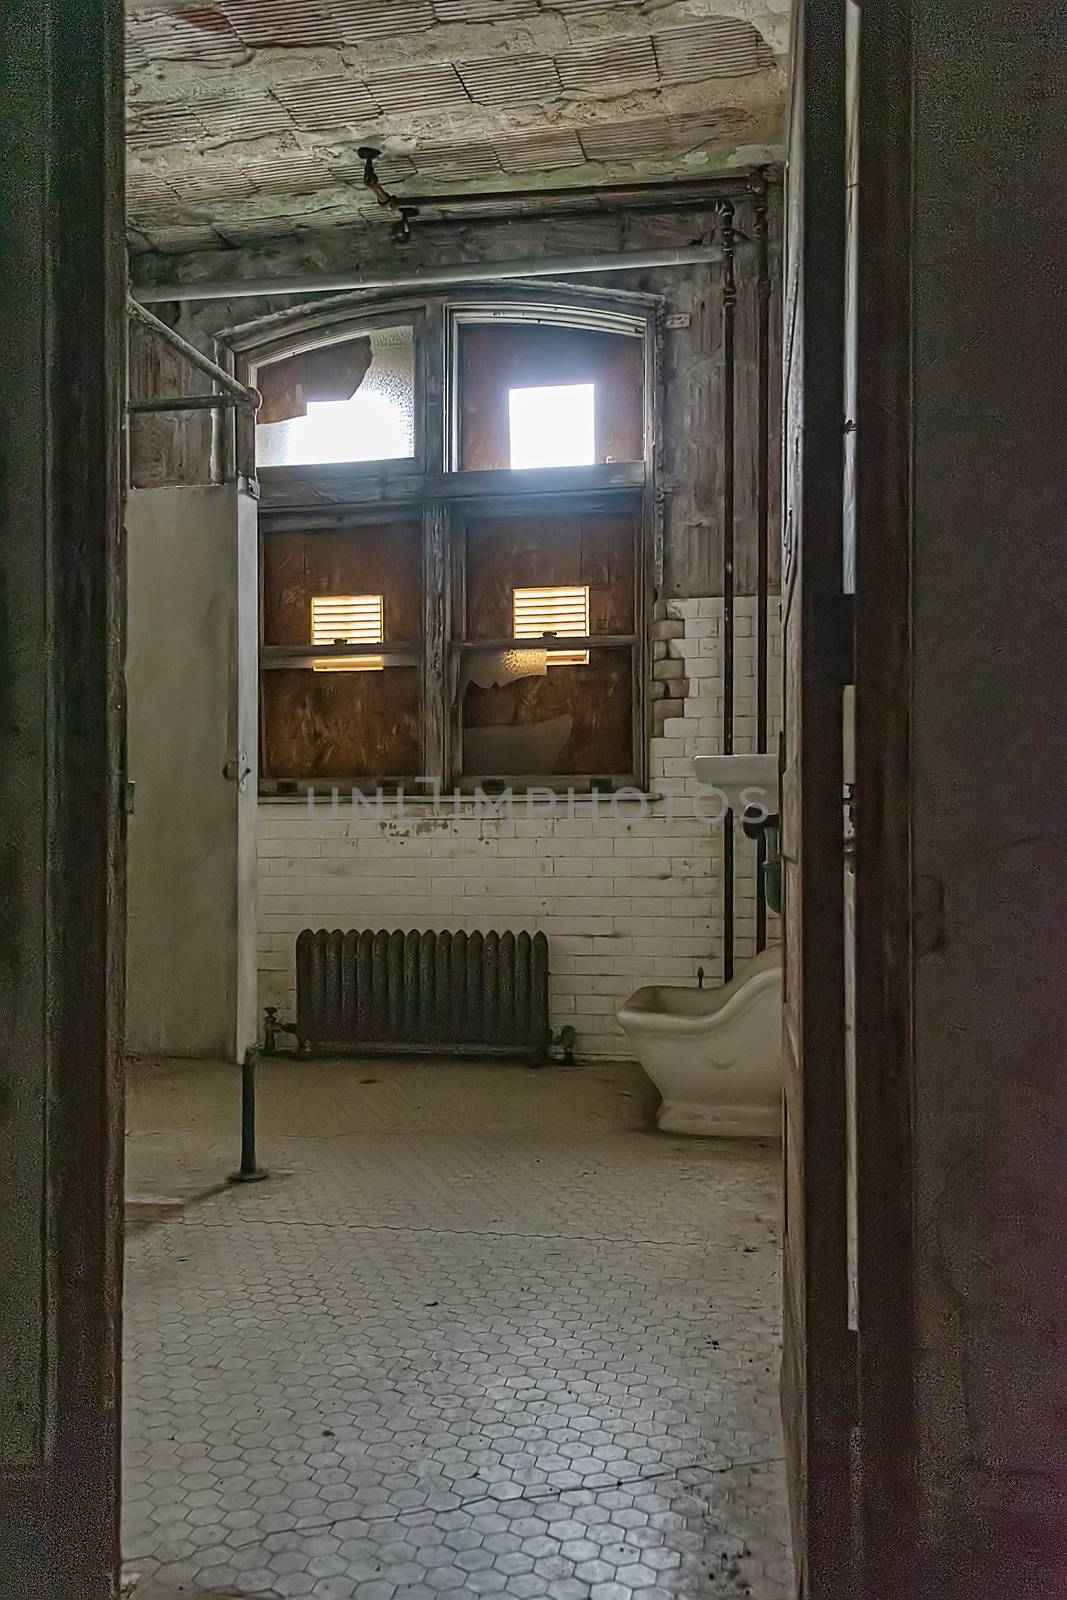 USA, New York, Ellis Island - May 2019: Toilet in abandoned building c. 1930-40